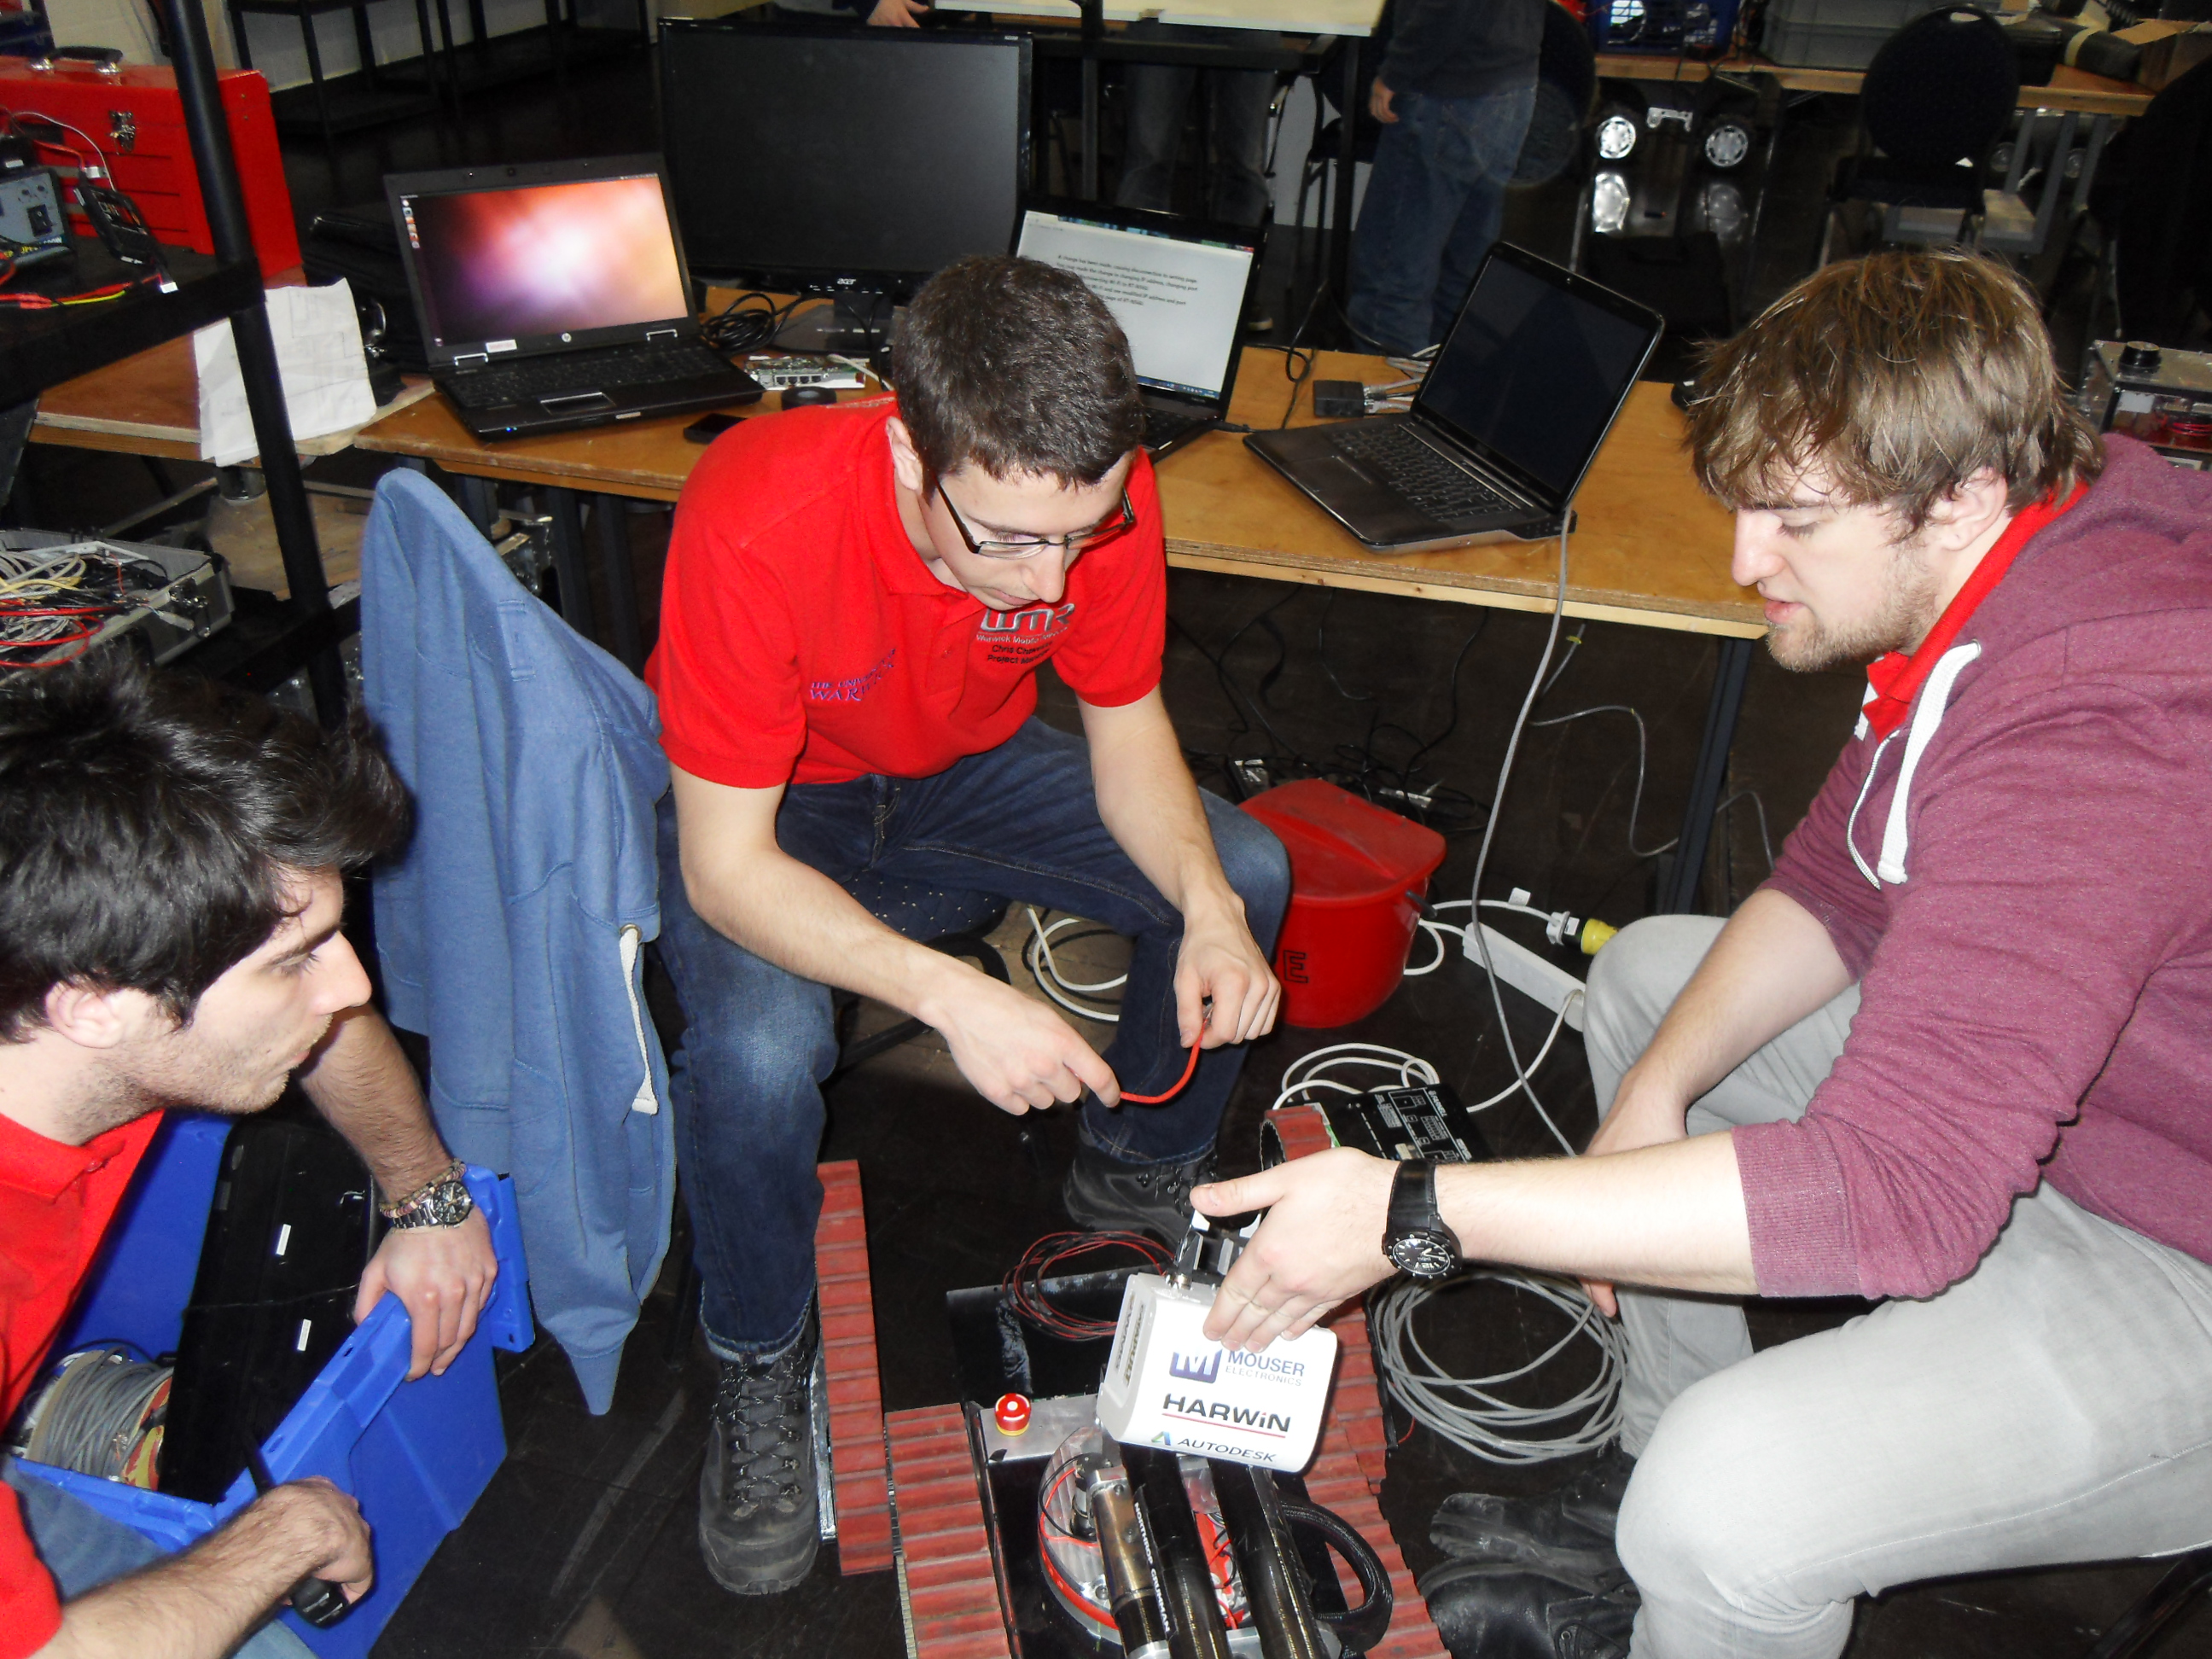 The team working on the old robot